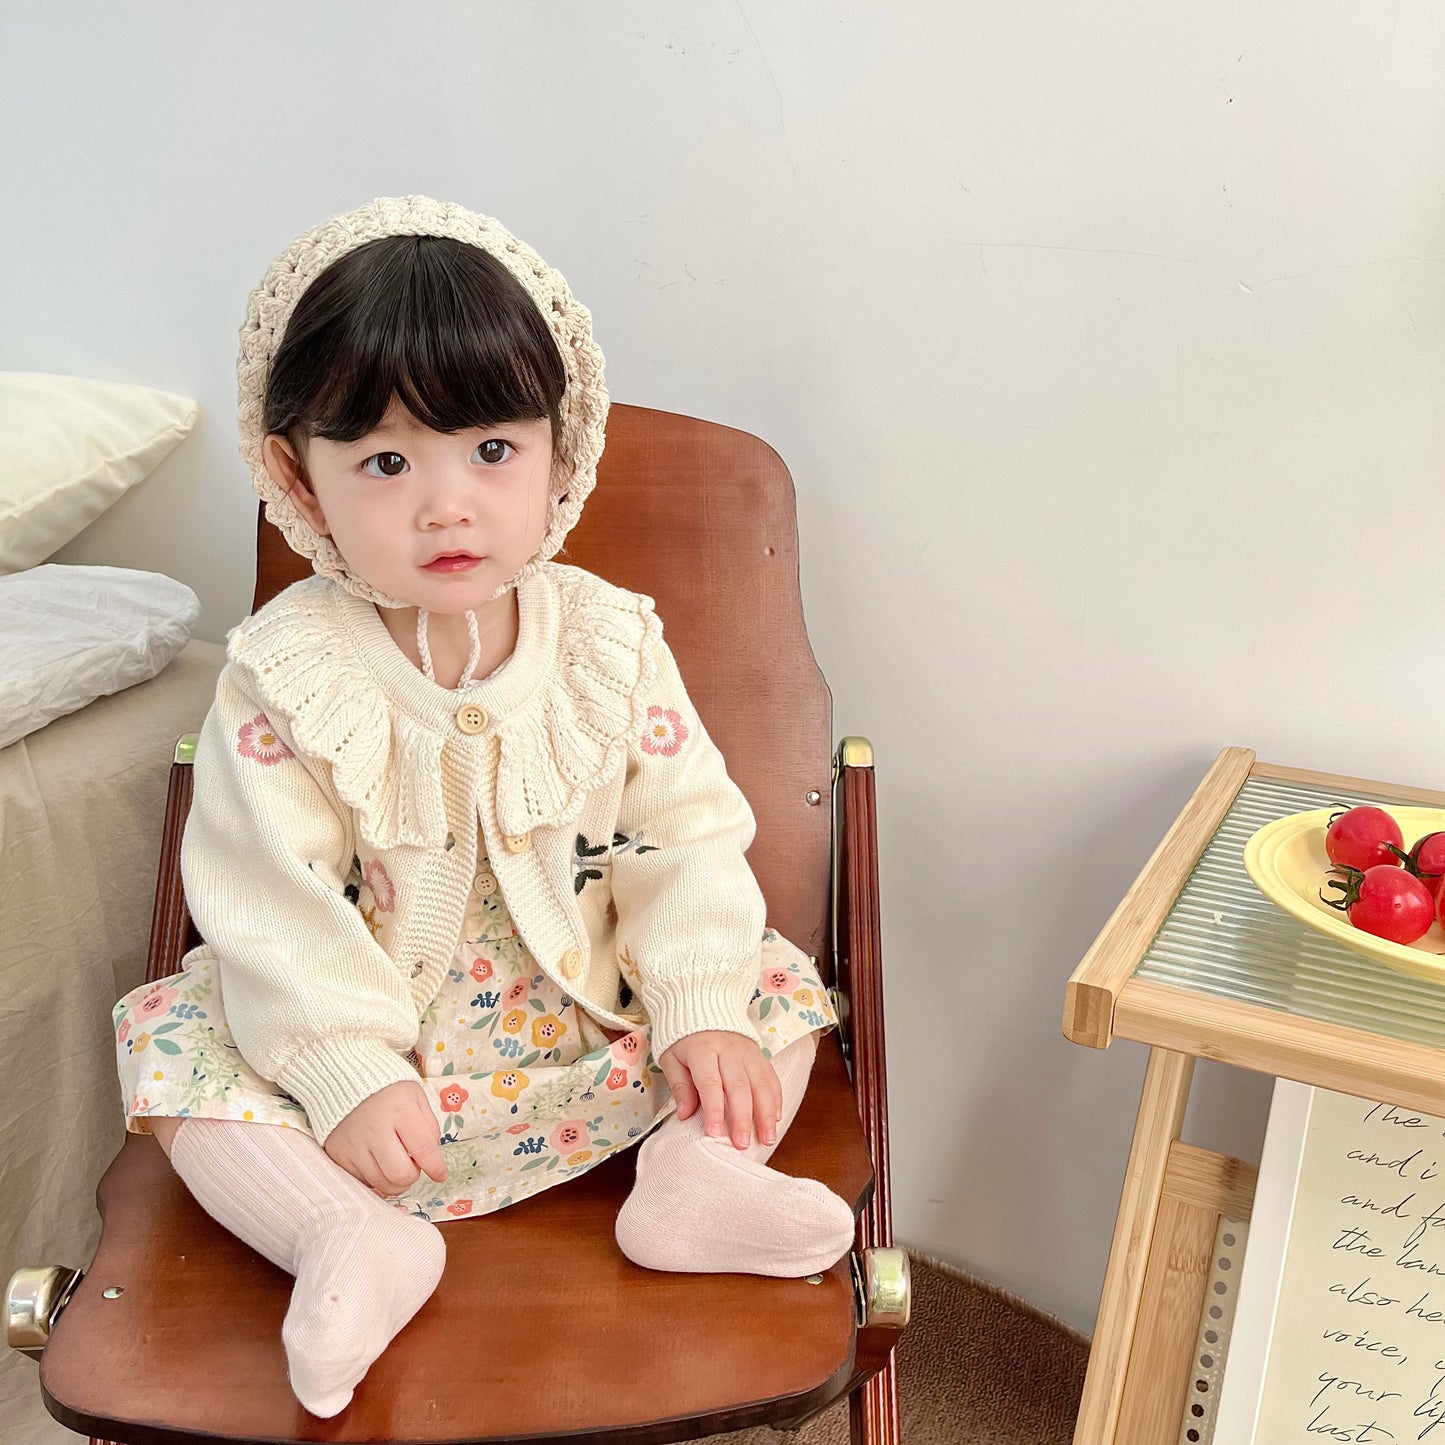 Baby knitwear embroidered flower coat girl baby sweater 100% cotton lace round neck spring baby cardigan